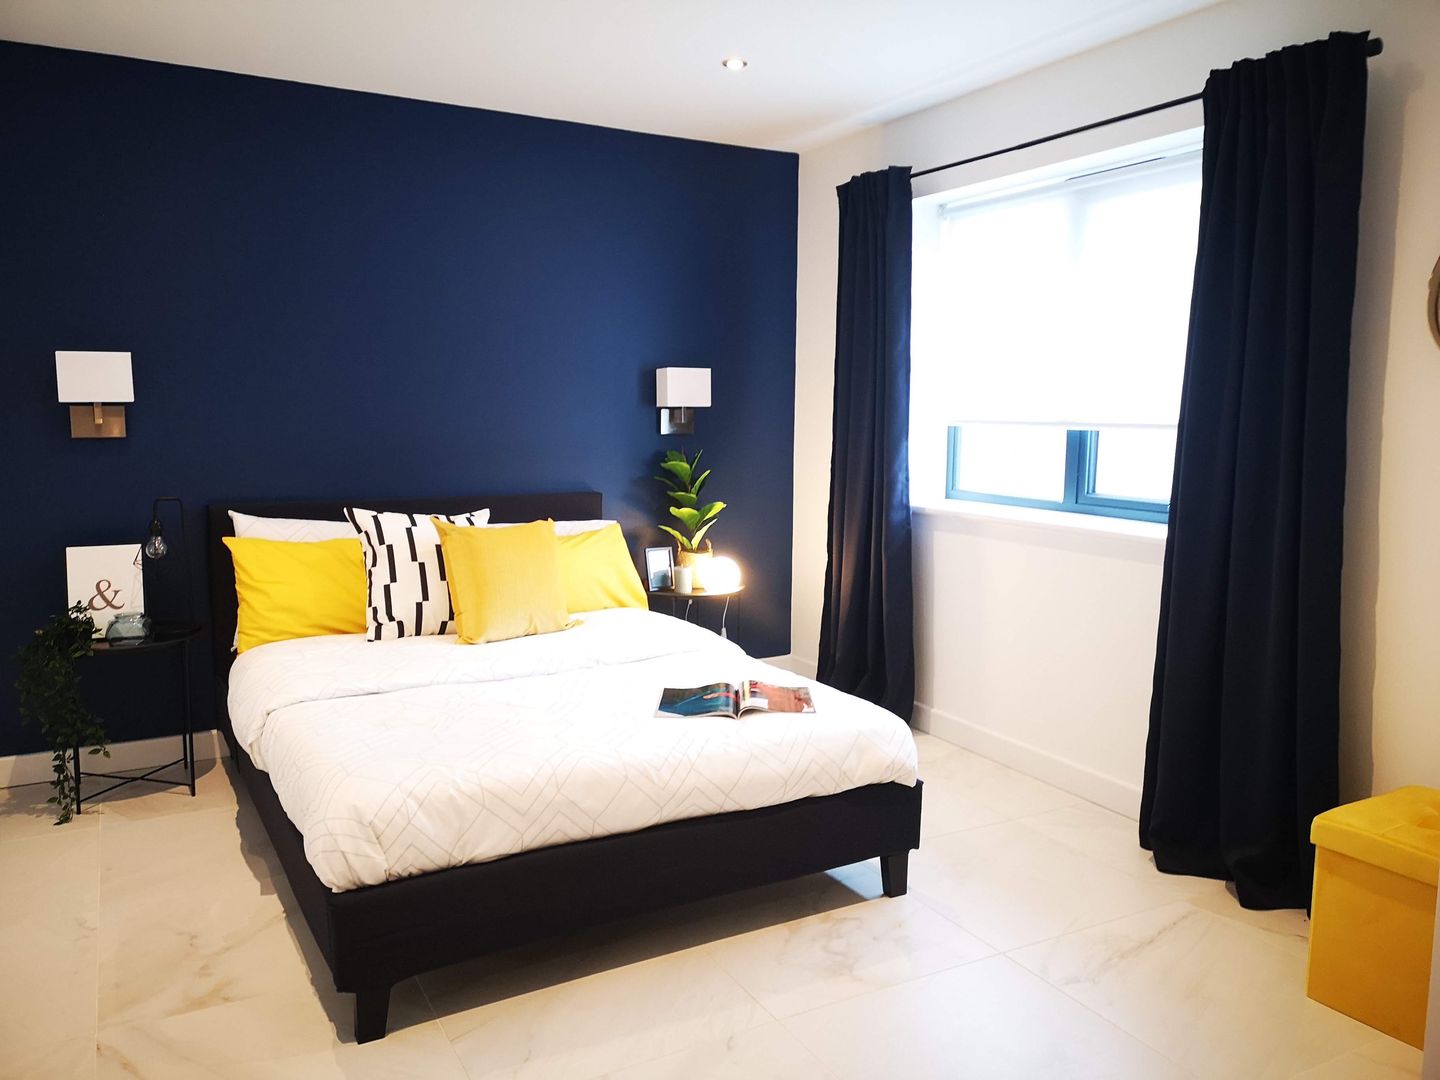 Contrasting navy bedroom THE FRESH INTERIOR COMPANY Kamar tidur kecil Marmer Dulux sapphire salute mustard accessories Ikea curtains marble tiled floor